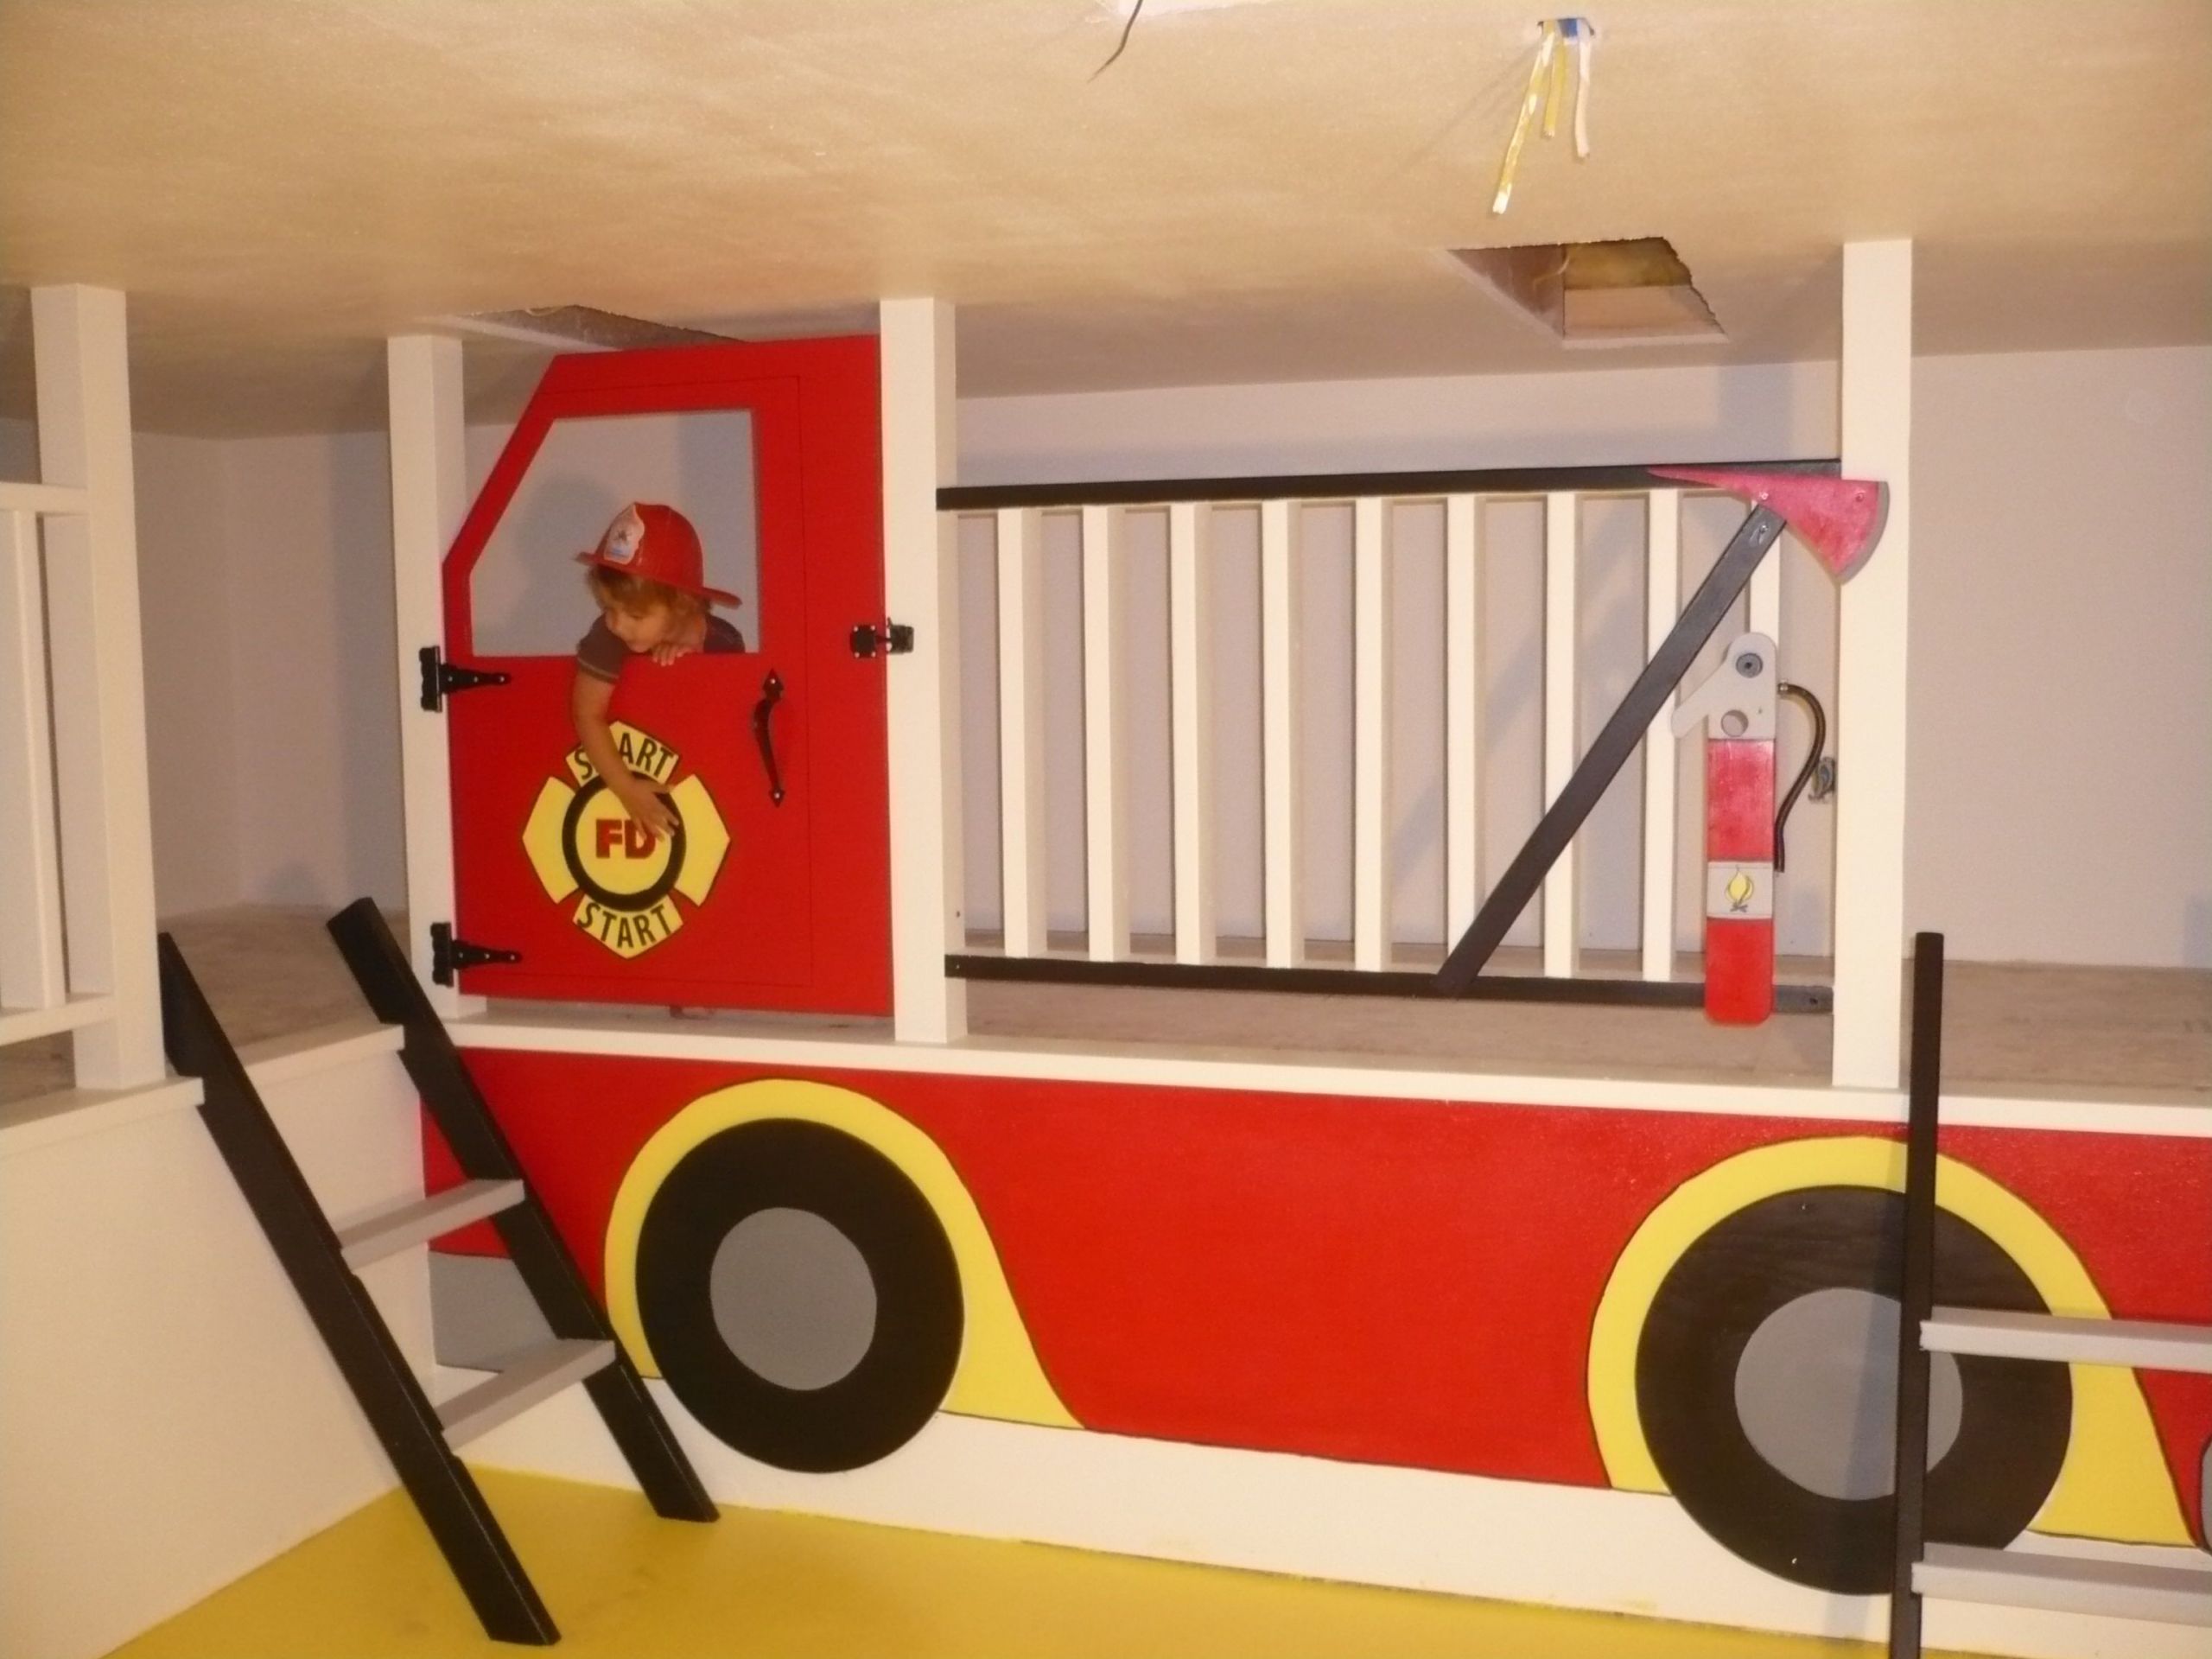 Fire Truck Kids Bedroom
 Non bed fire truck loft But COULD do it as a bed